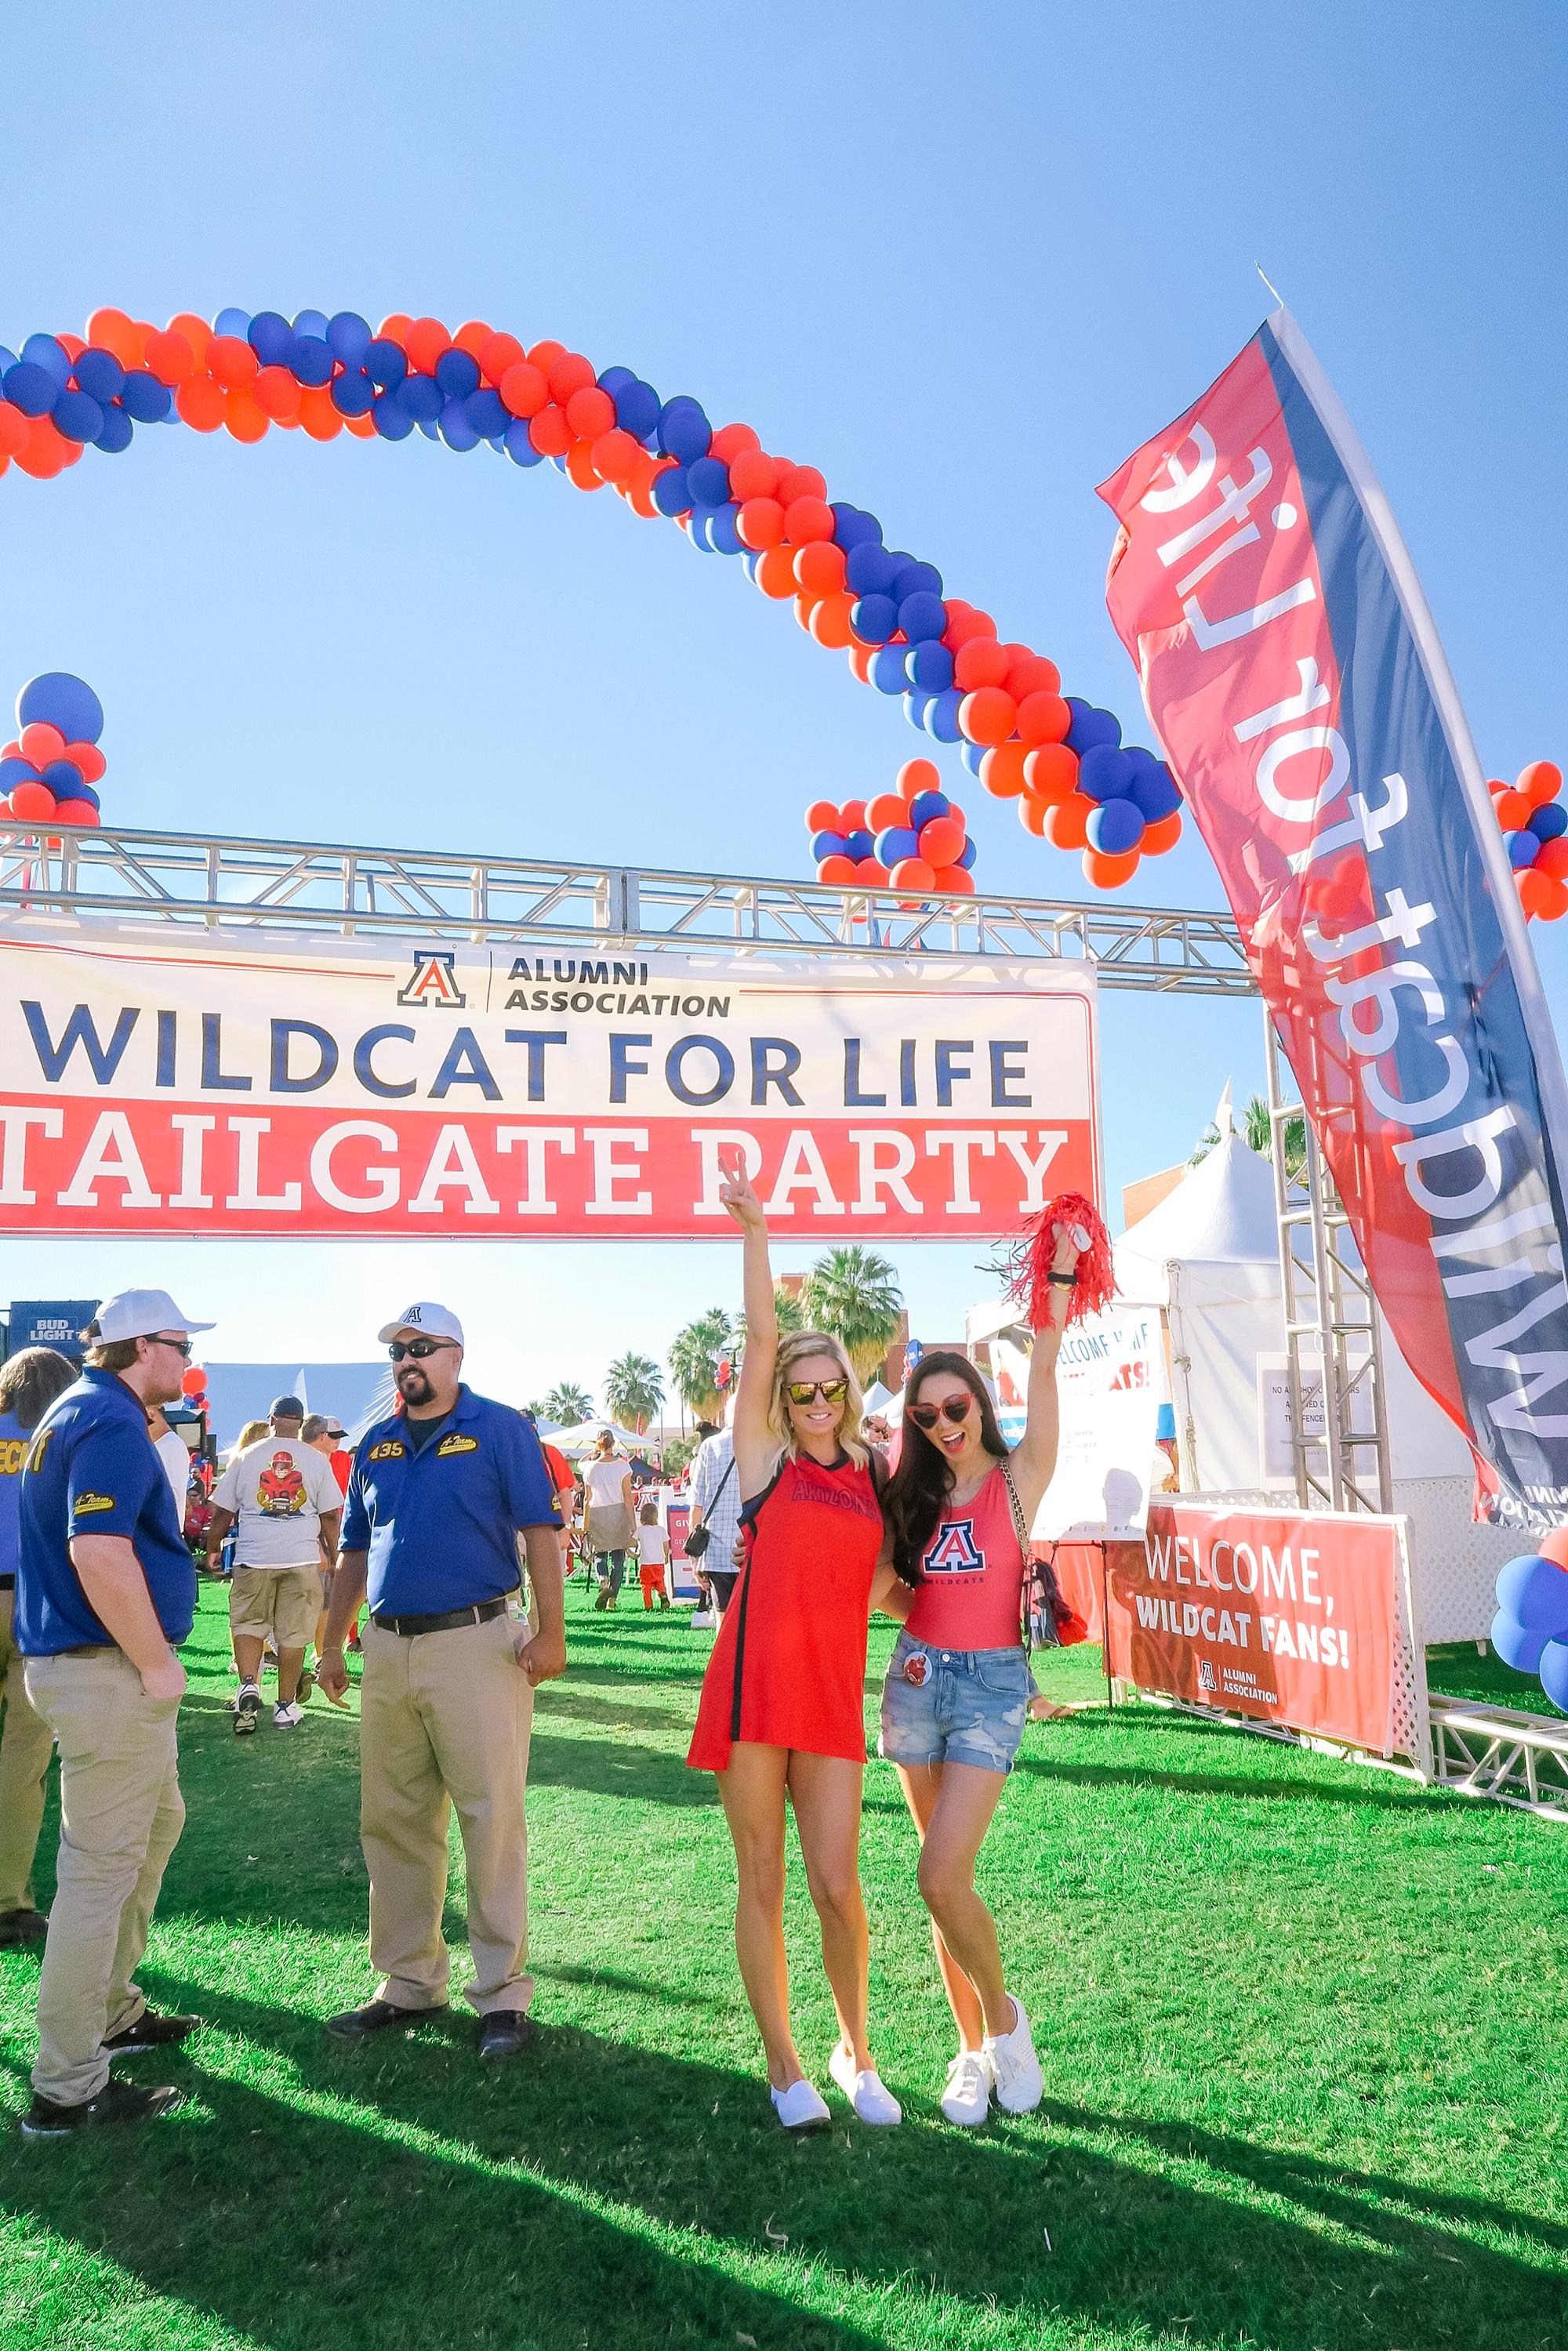 wildcat for life alumni tailgate party tent at University of Arizona homecoming 2018